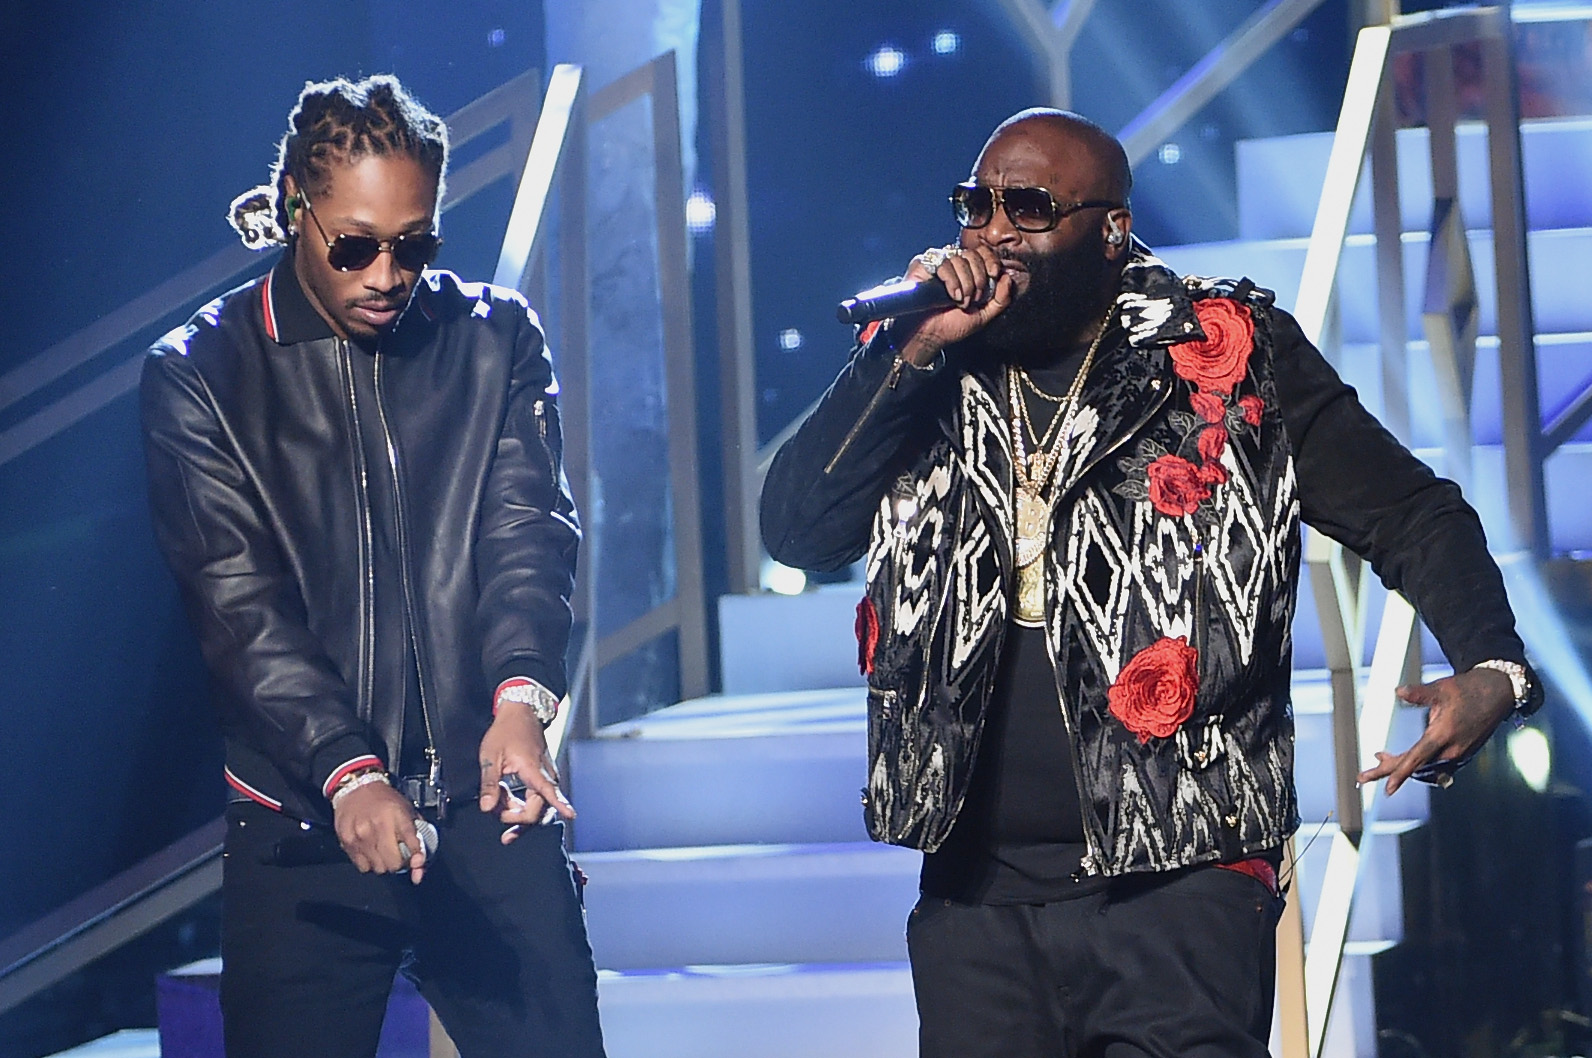 rick ross - "green gucci suit" featuring Future